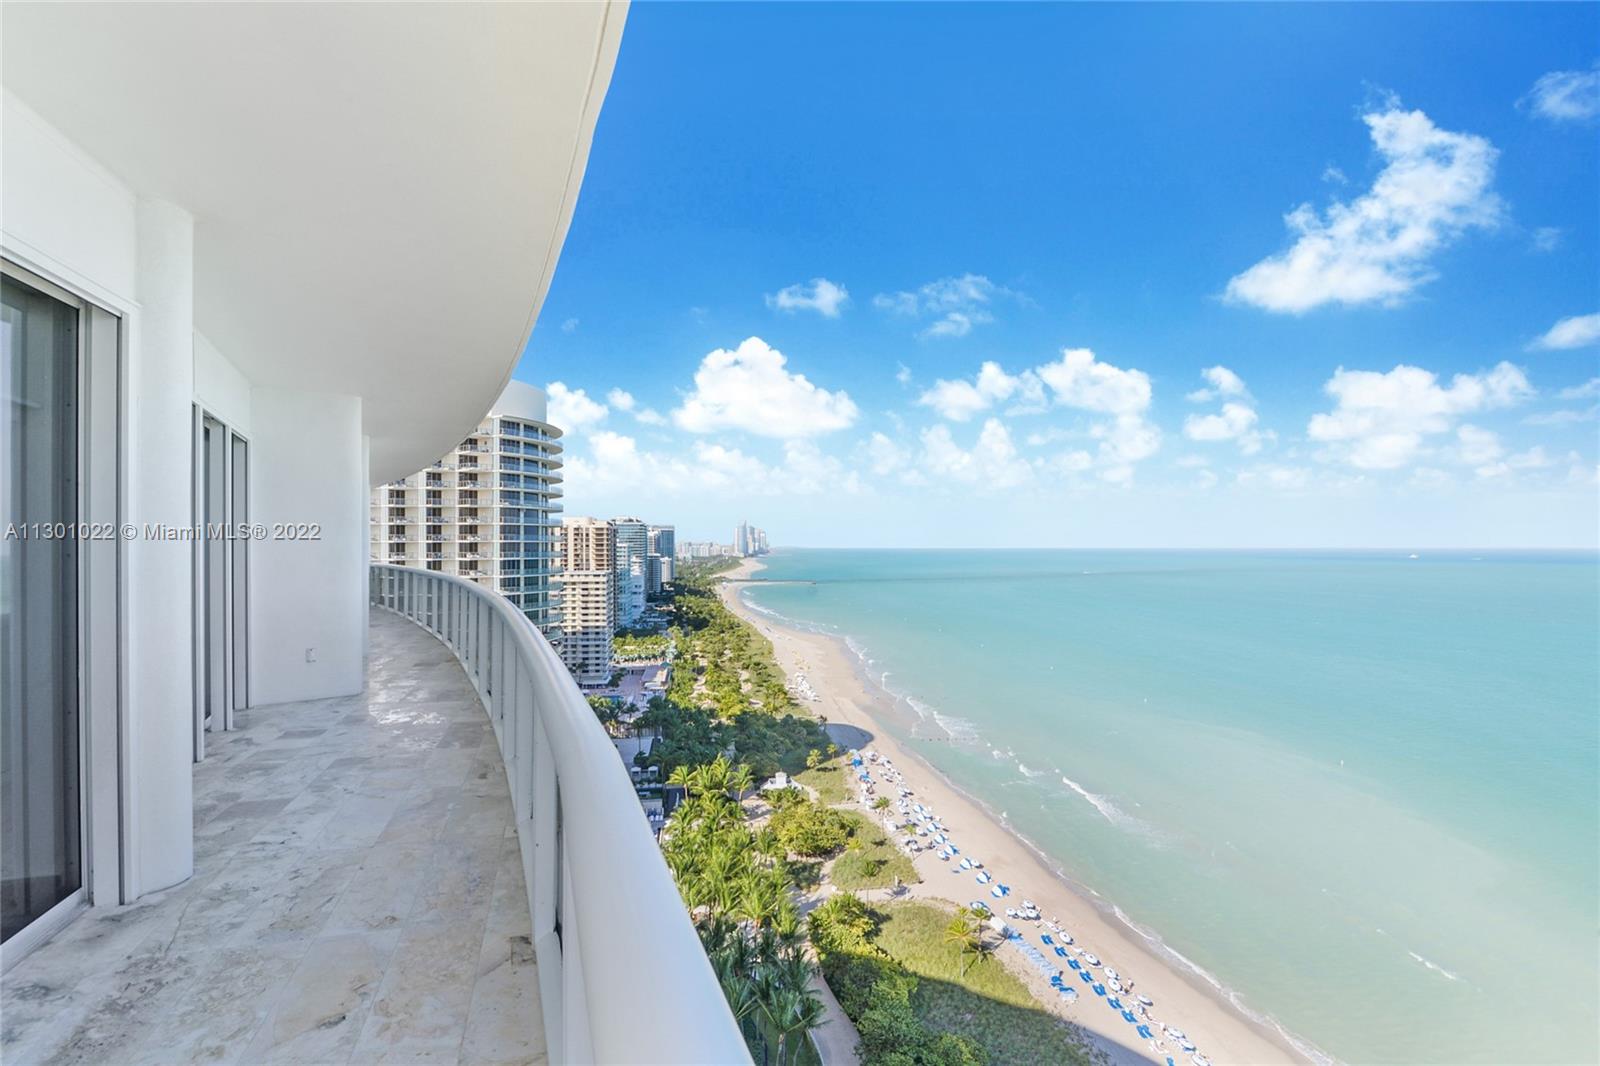 The biggest Penthouse unit in Bal Harbour. More than 5,000 sq. ft. of breath-taking views!
Unique opportunity to live in one of the most prestigious buildings in Bal Harbour - The Majestic Tower! This full service, private elevator building has an exceptional services and amenities - fitness, spa, pool, beach service, restaurant, tennis, basketball and security. Conveniently located next to world famous Bal Harbour Shops.